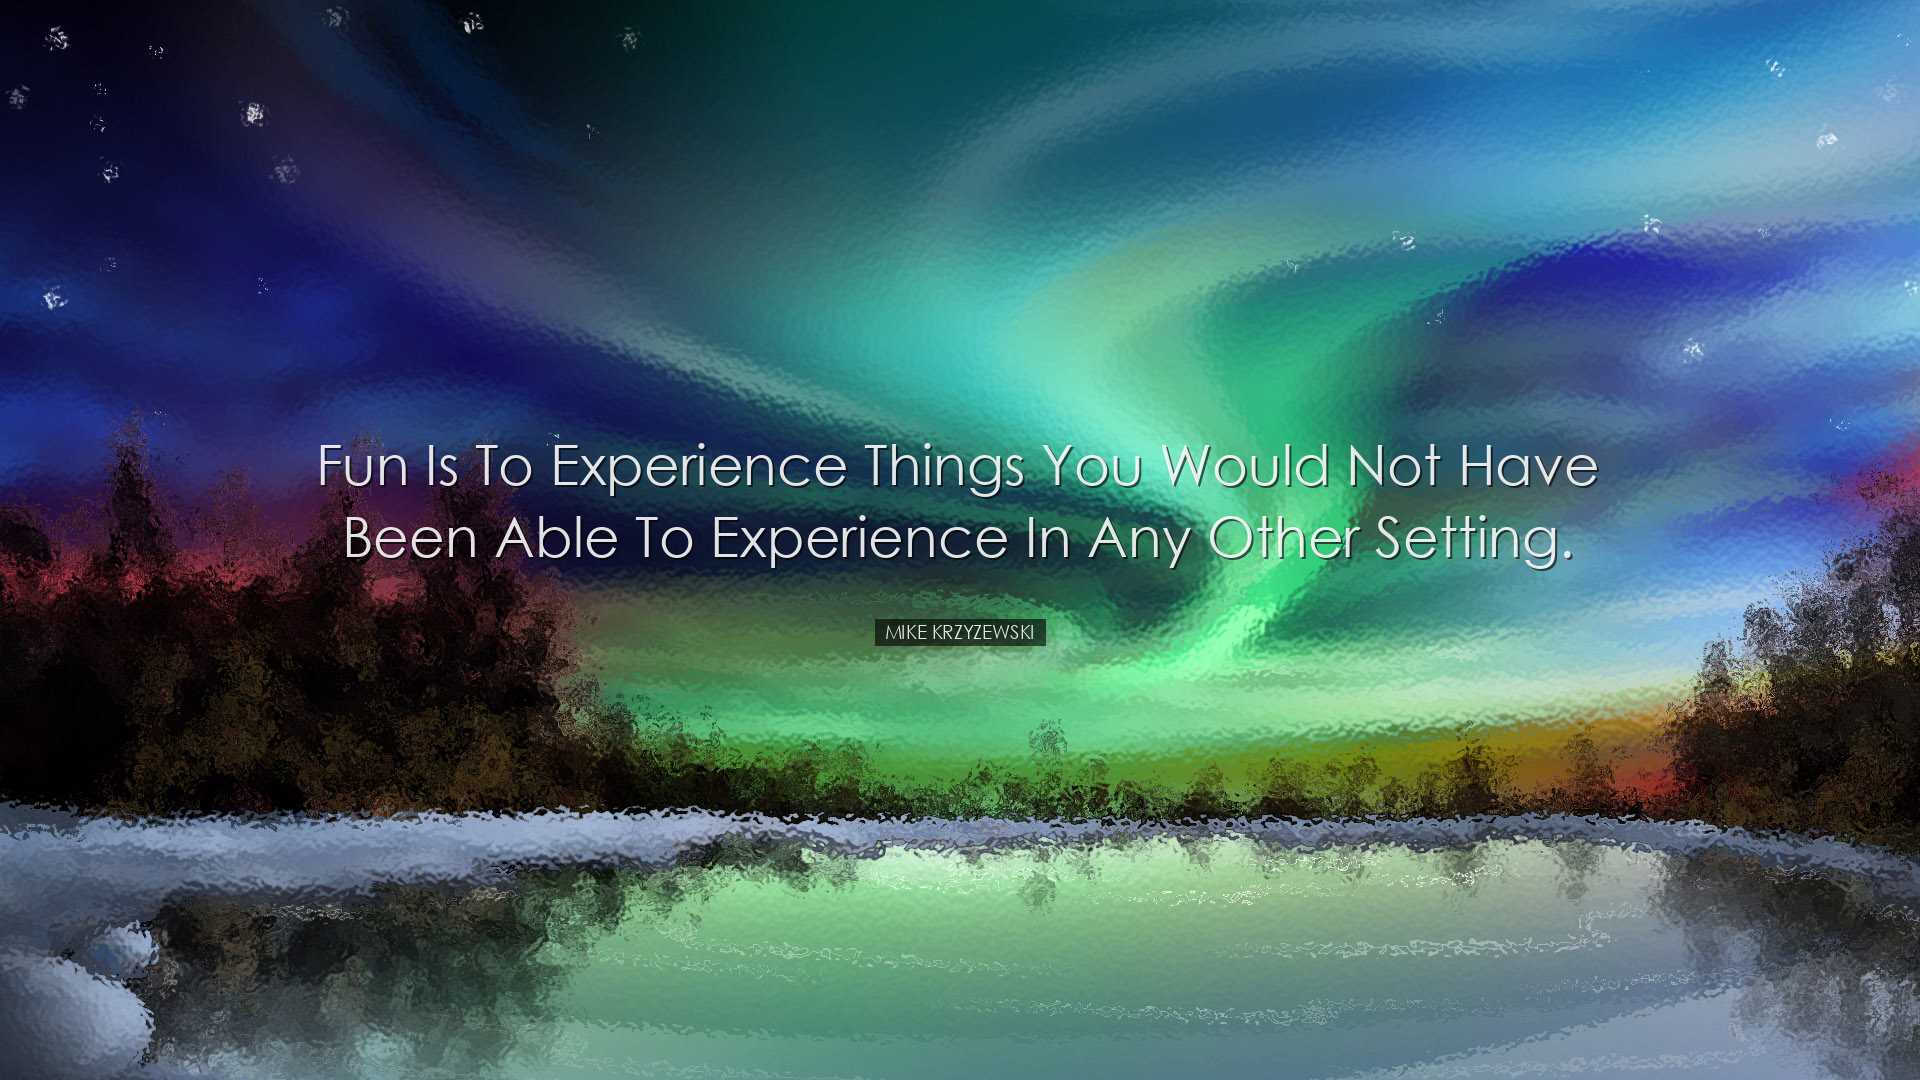 Fun is to experience things you would not have been able to experi